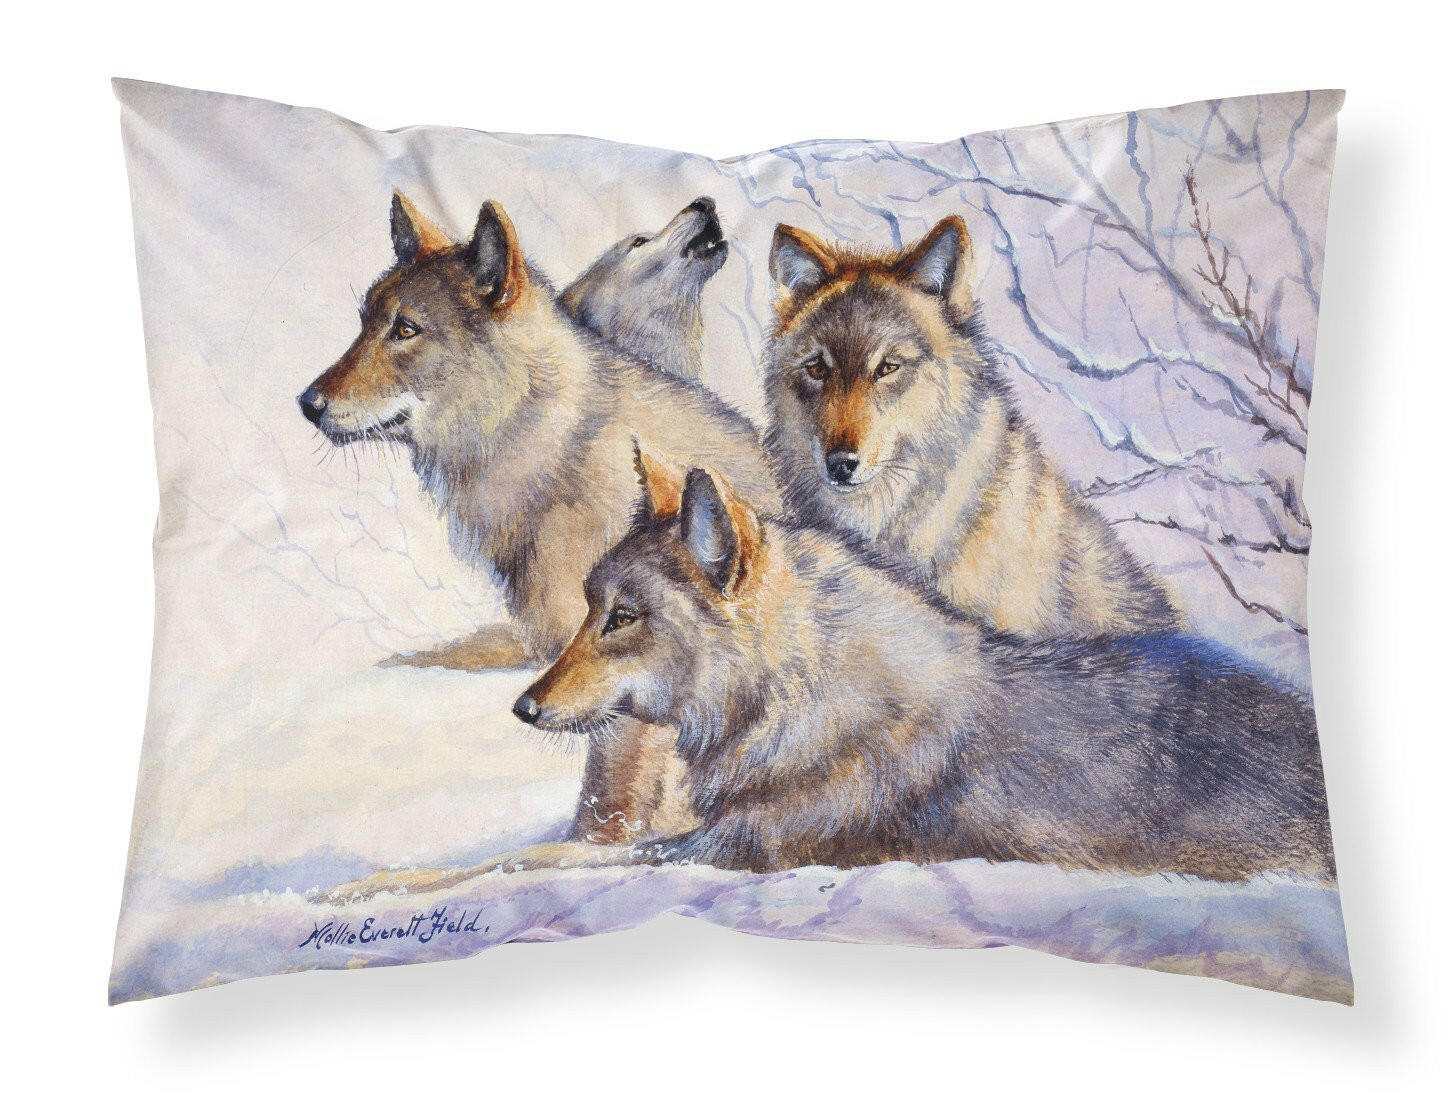 Wolves by Mollie Field Fabric Standard Pillowcase FMF0007PILLOWCASE by Caroline's Treasures